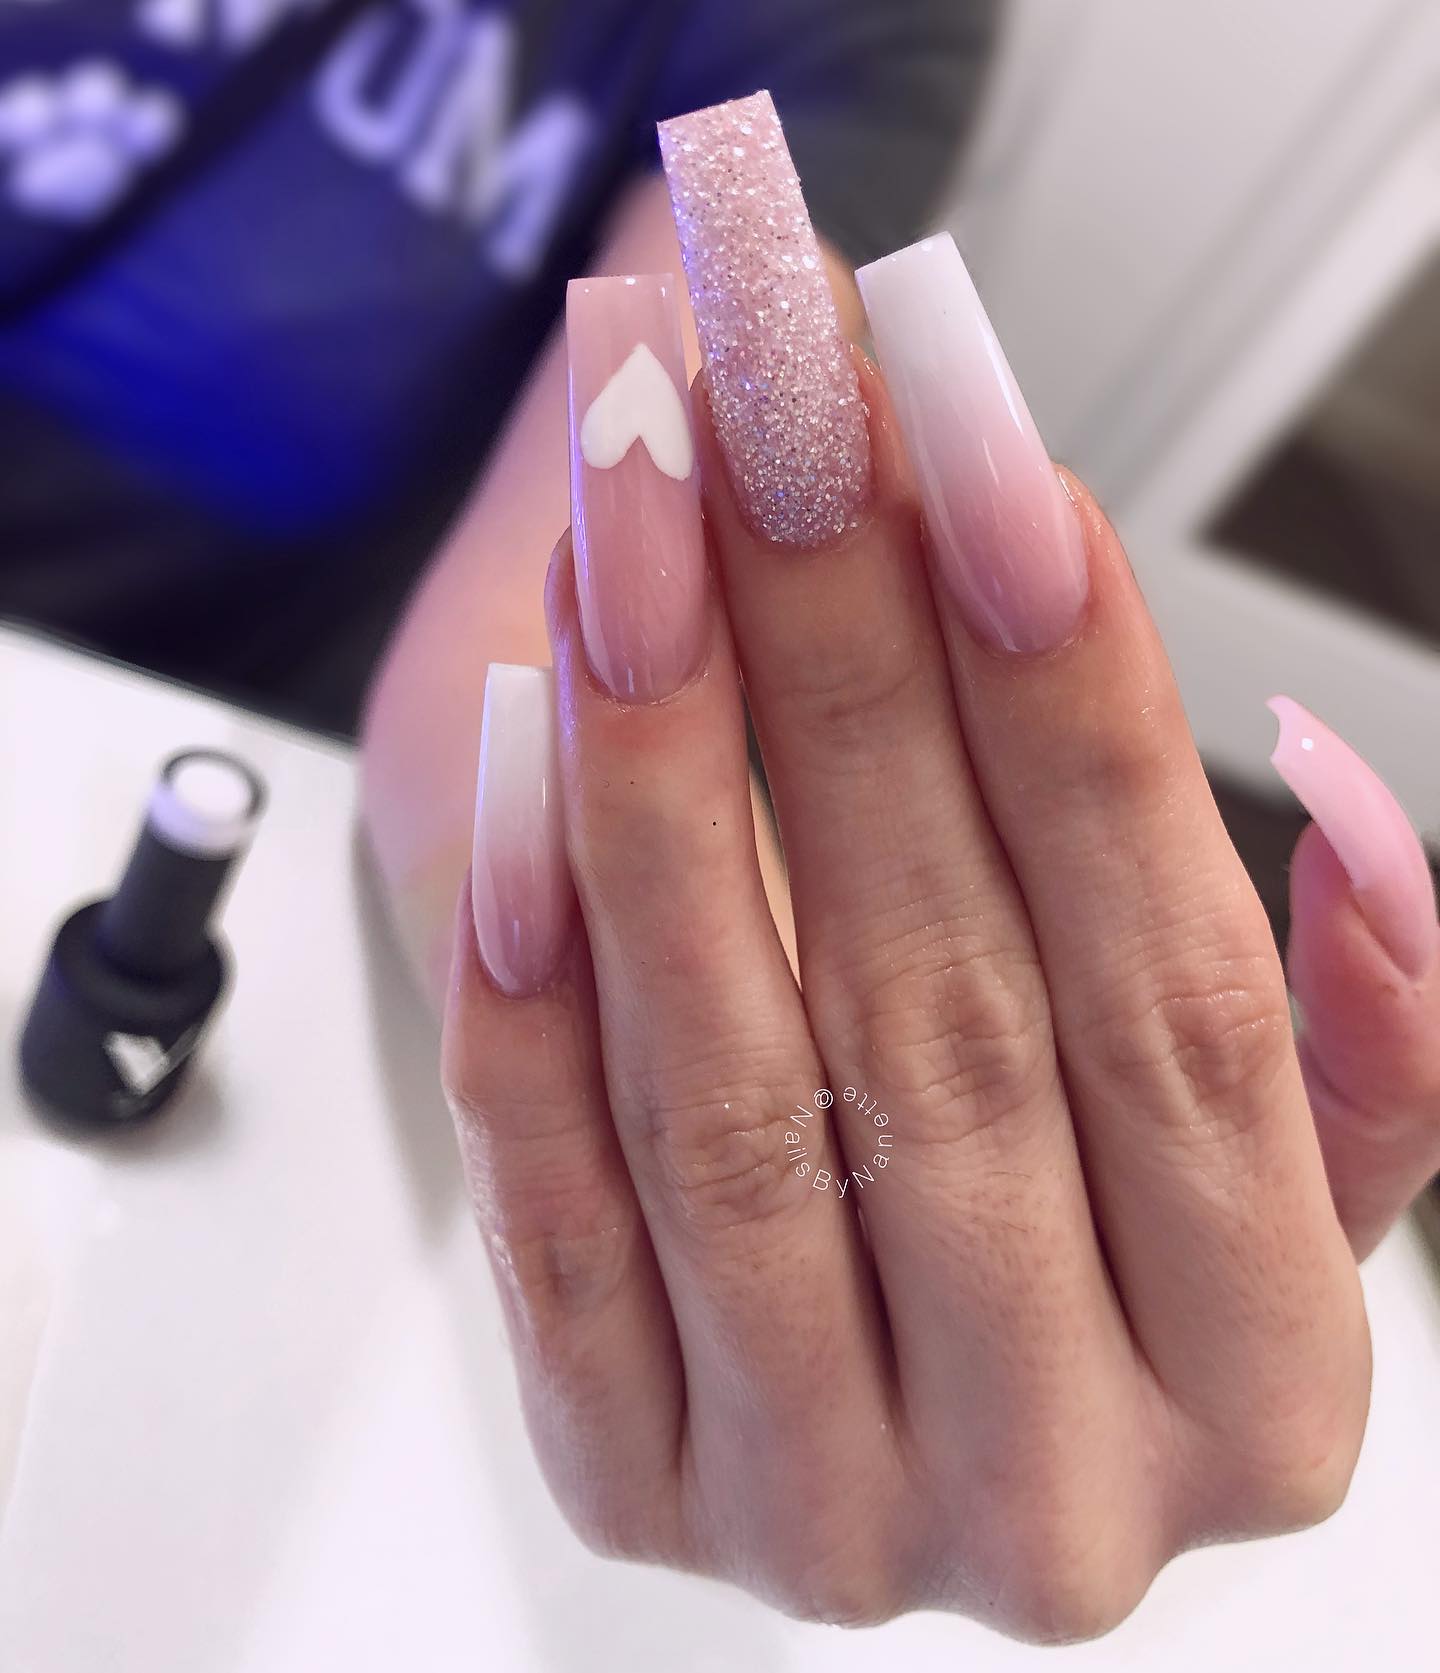 Let's show how adorable you are with long square pink and white ombre nails that are decorated with a heart nail art and glitters. The pink nail polish is on the foreground, so you will feel the cuteness of pink to a great extent.